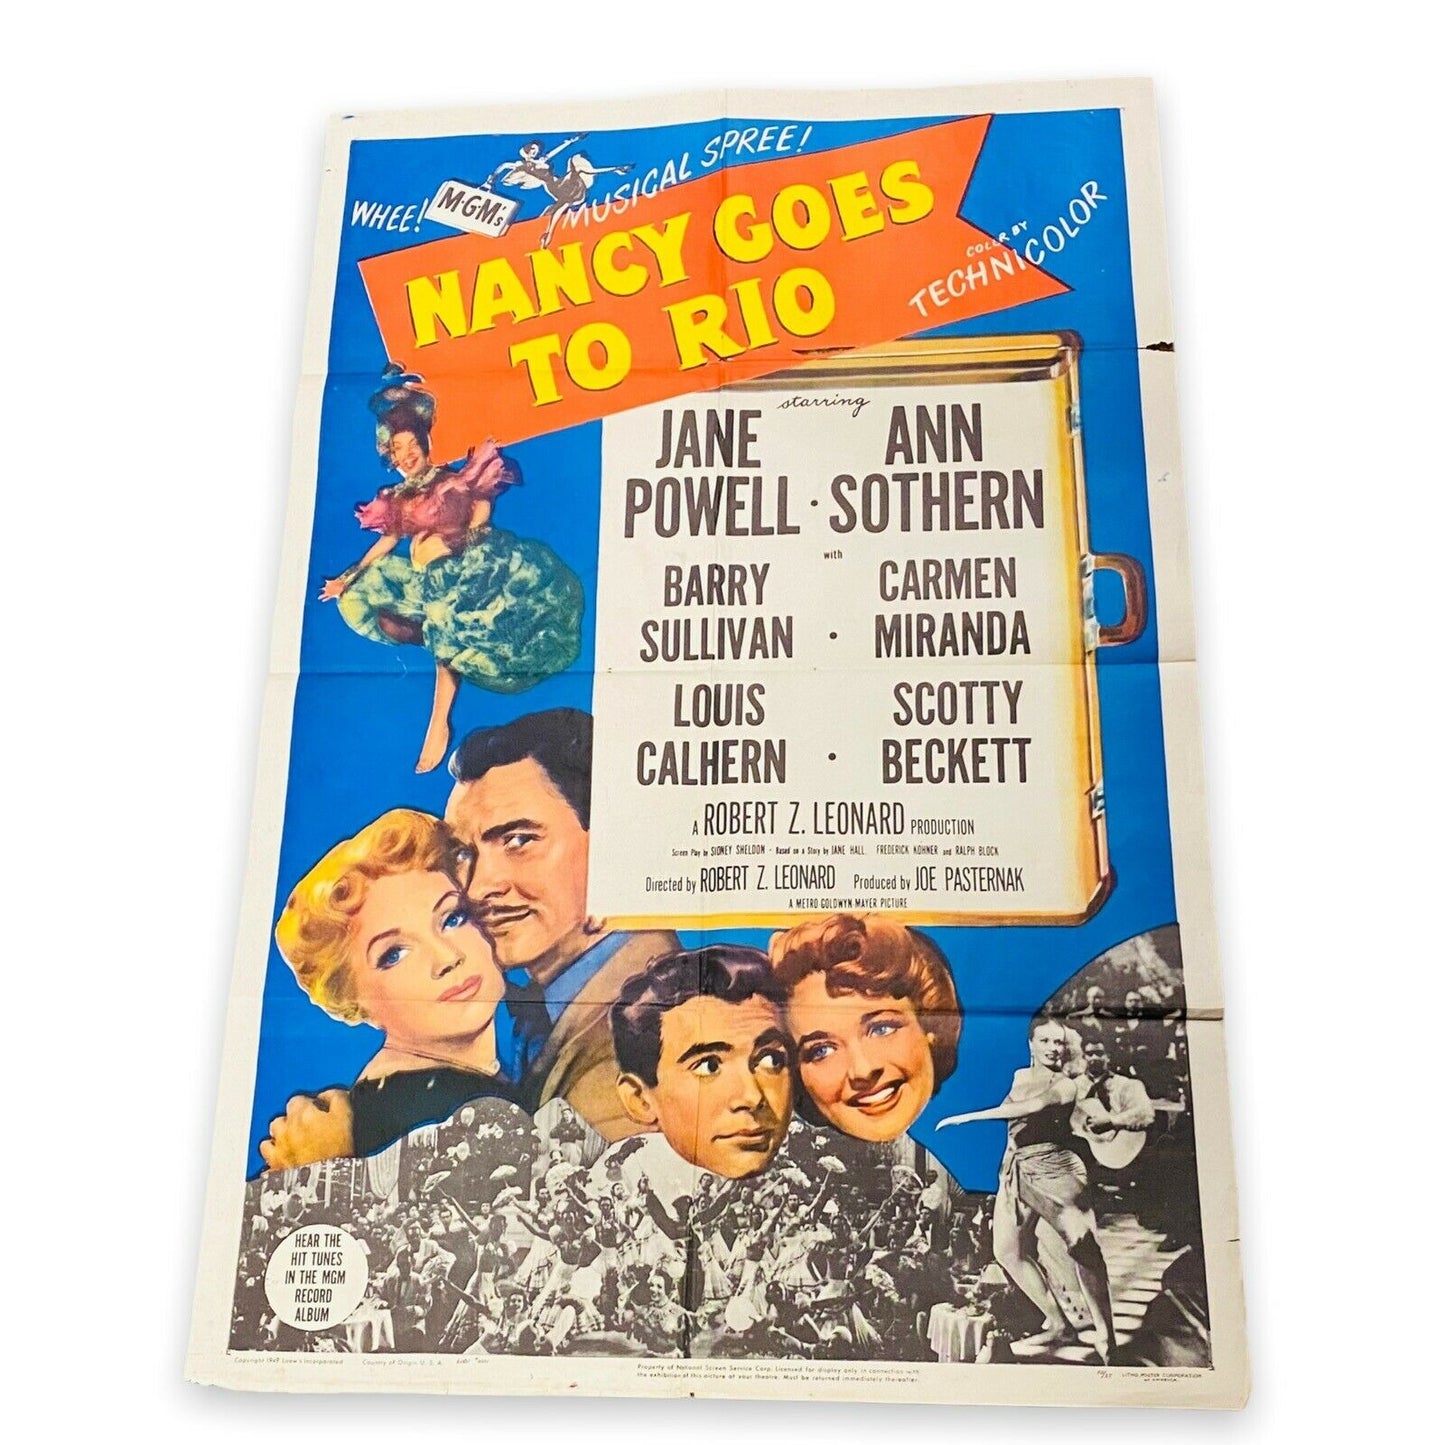 Jane Powell Rosemary Clooney "Nancy Goes to Rio" One Sheet Poster 1950 ORIGINAL